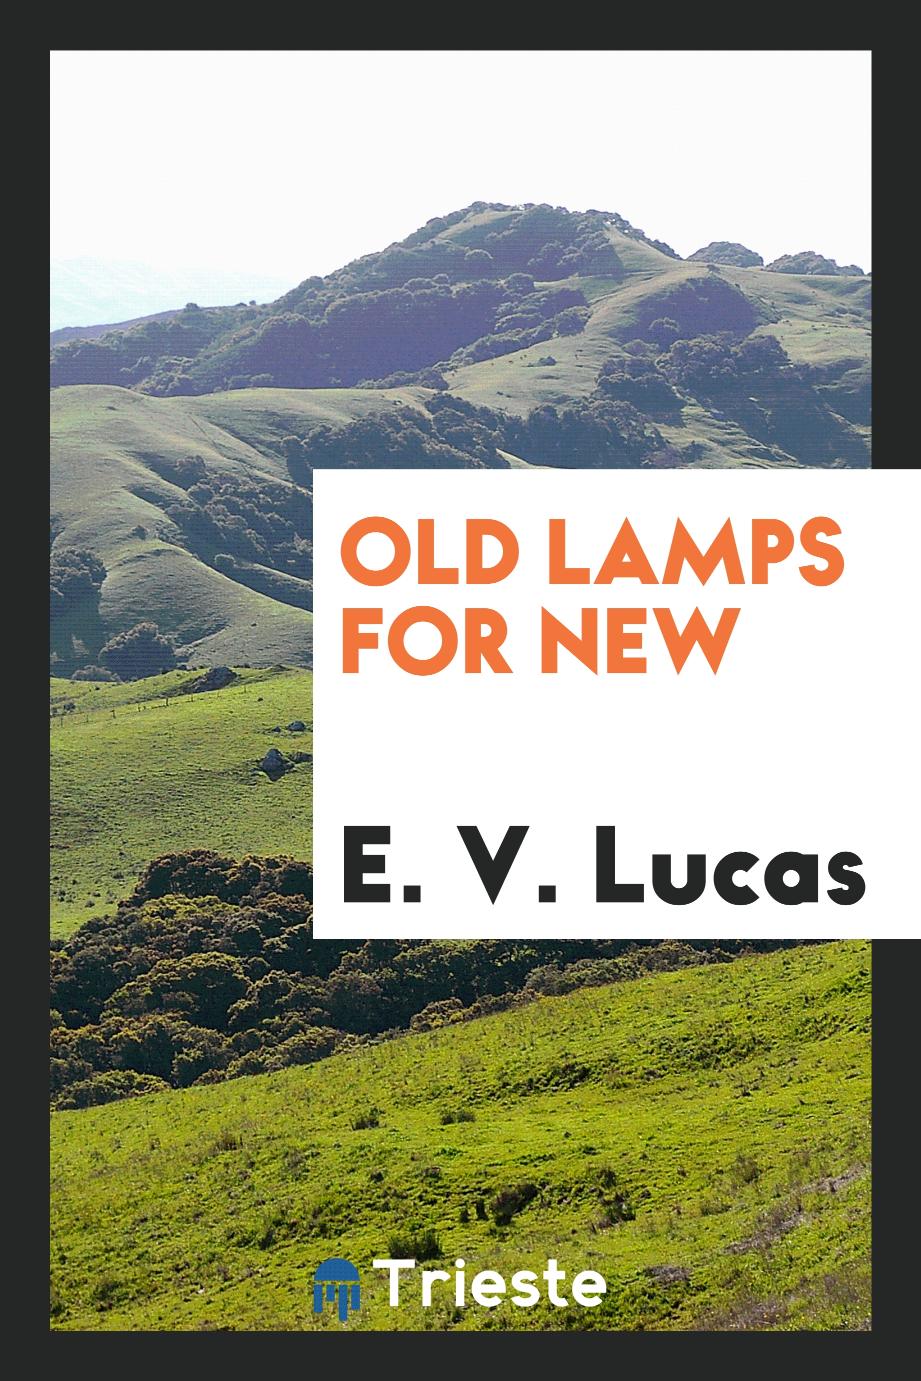 Old lamps for new